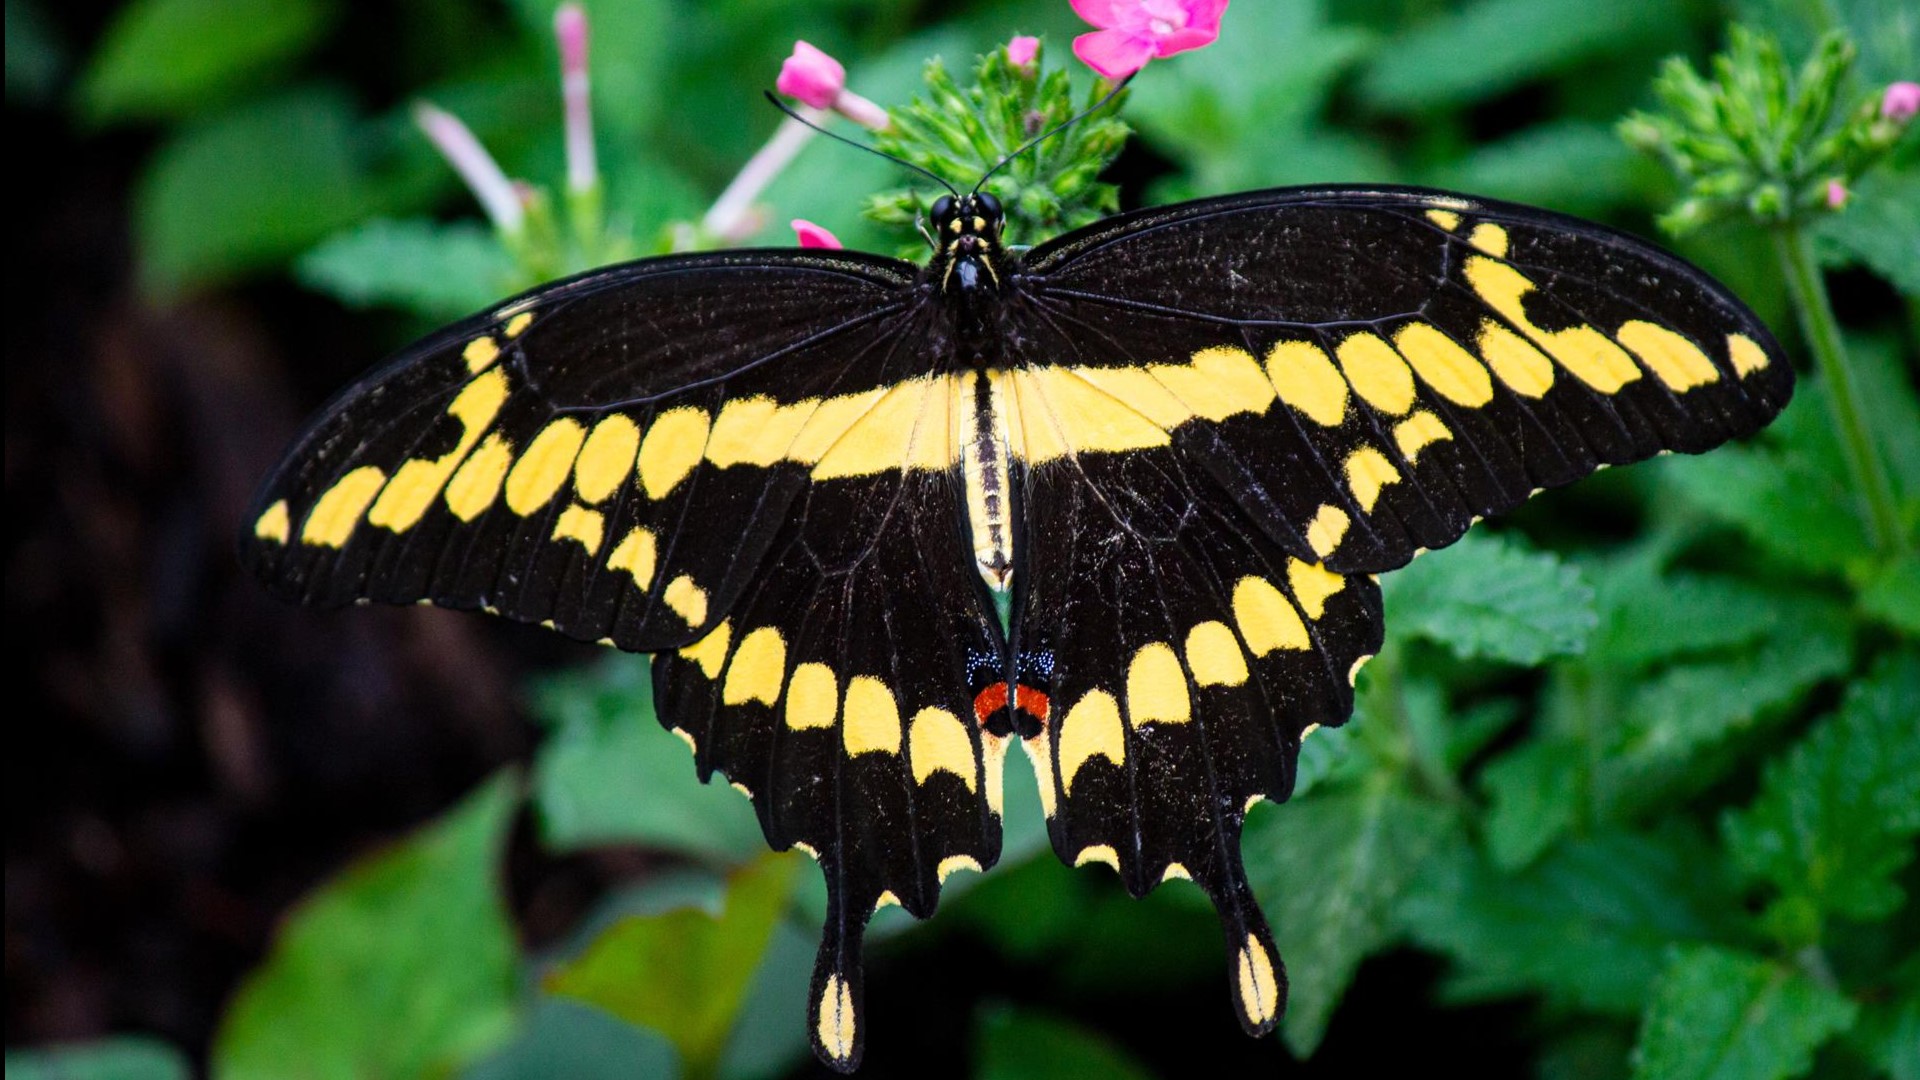 Whether families decide to trek to the Zoo through Memorial Day weekend or wait until free Tuesdays, the Metamorphosis butterfly exhibit is now open.